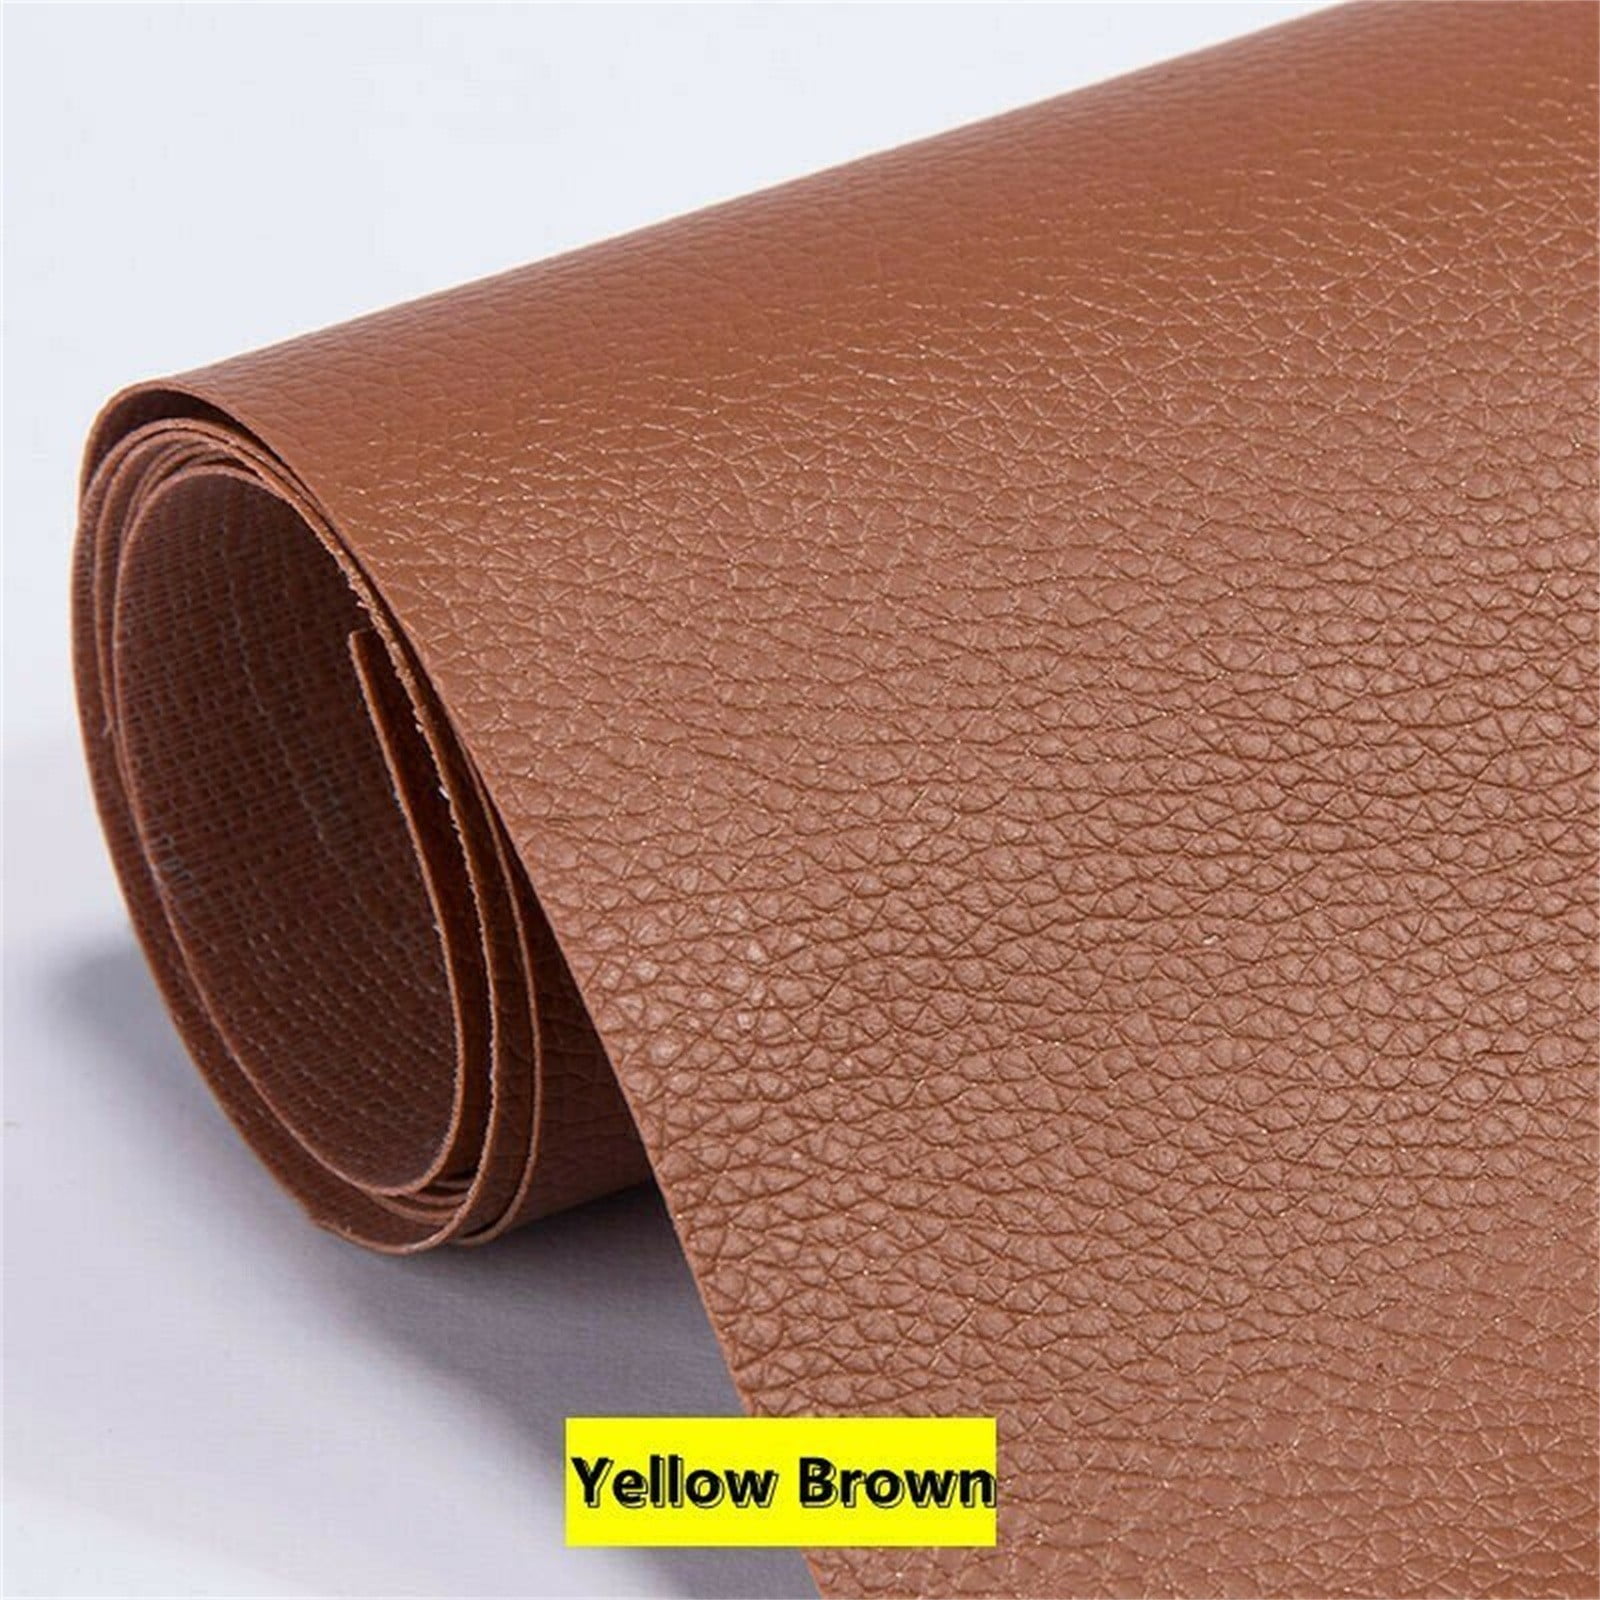 Leather Repair Patch Kit 7.8-61.8 inch Self-Adhesive Leather Repair Tape  for Sofas Couch Car Seats Handbags Jackets First Aid Patch